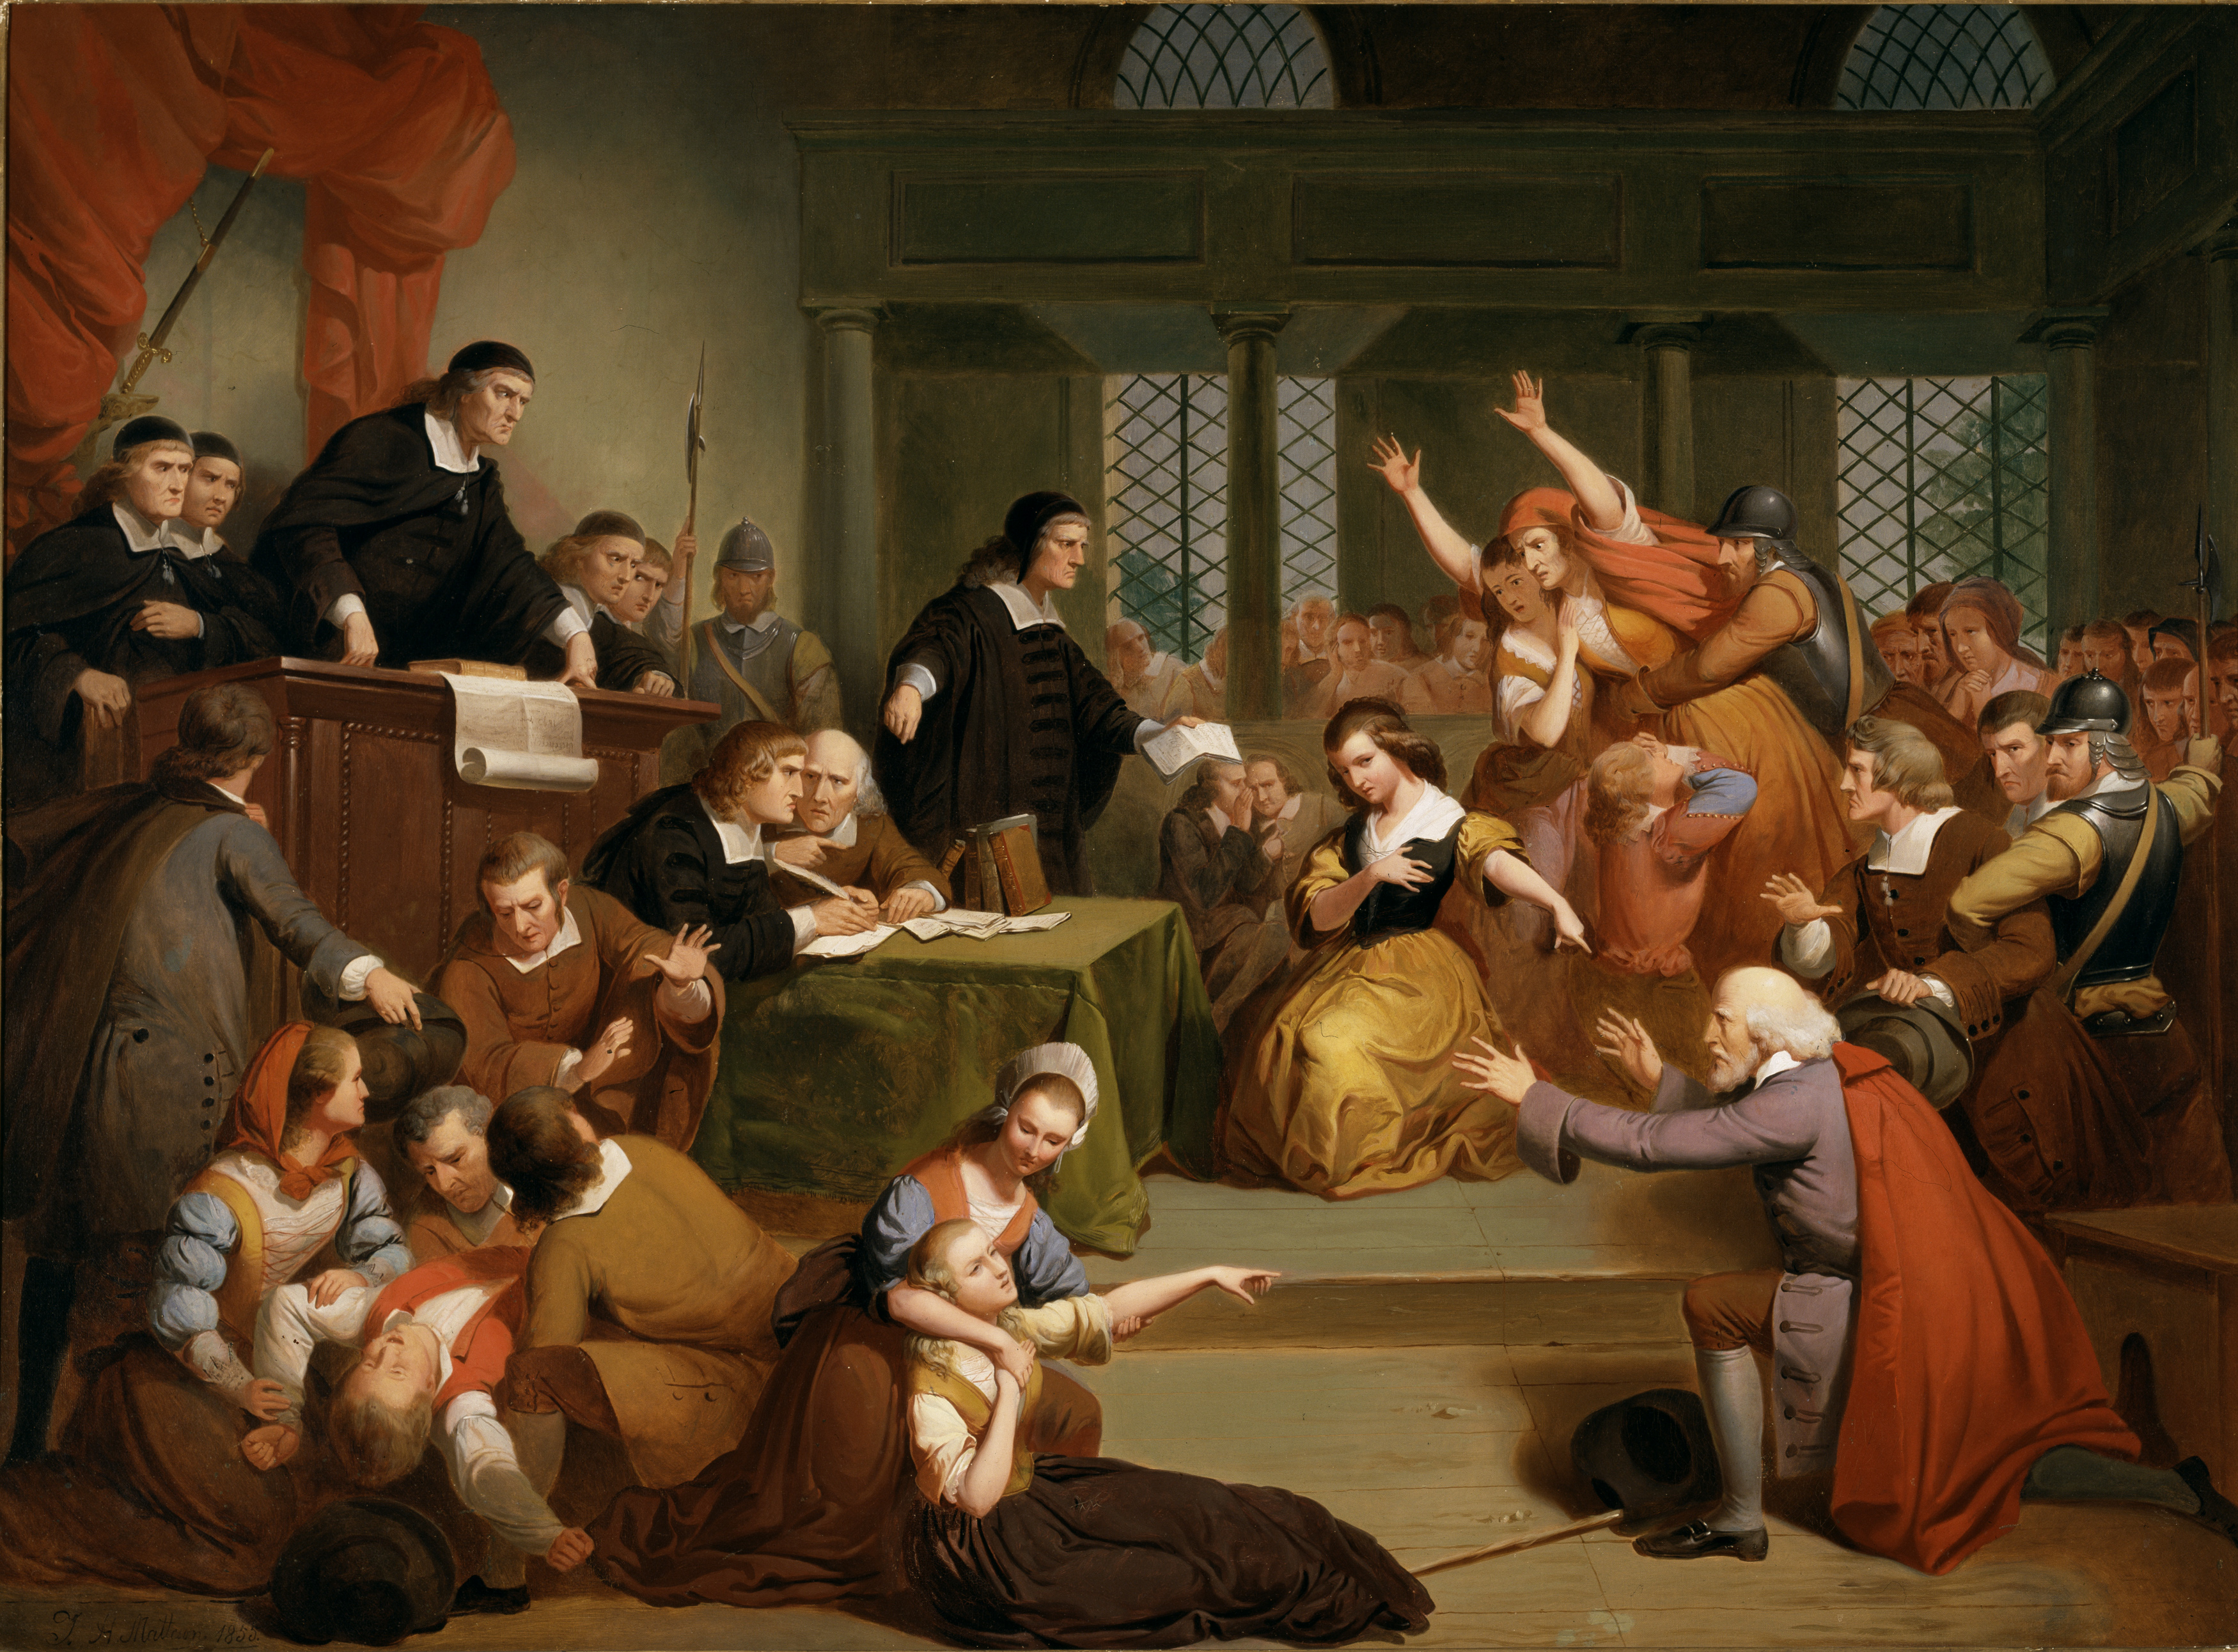 salem witch trials extended essay